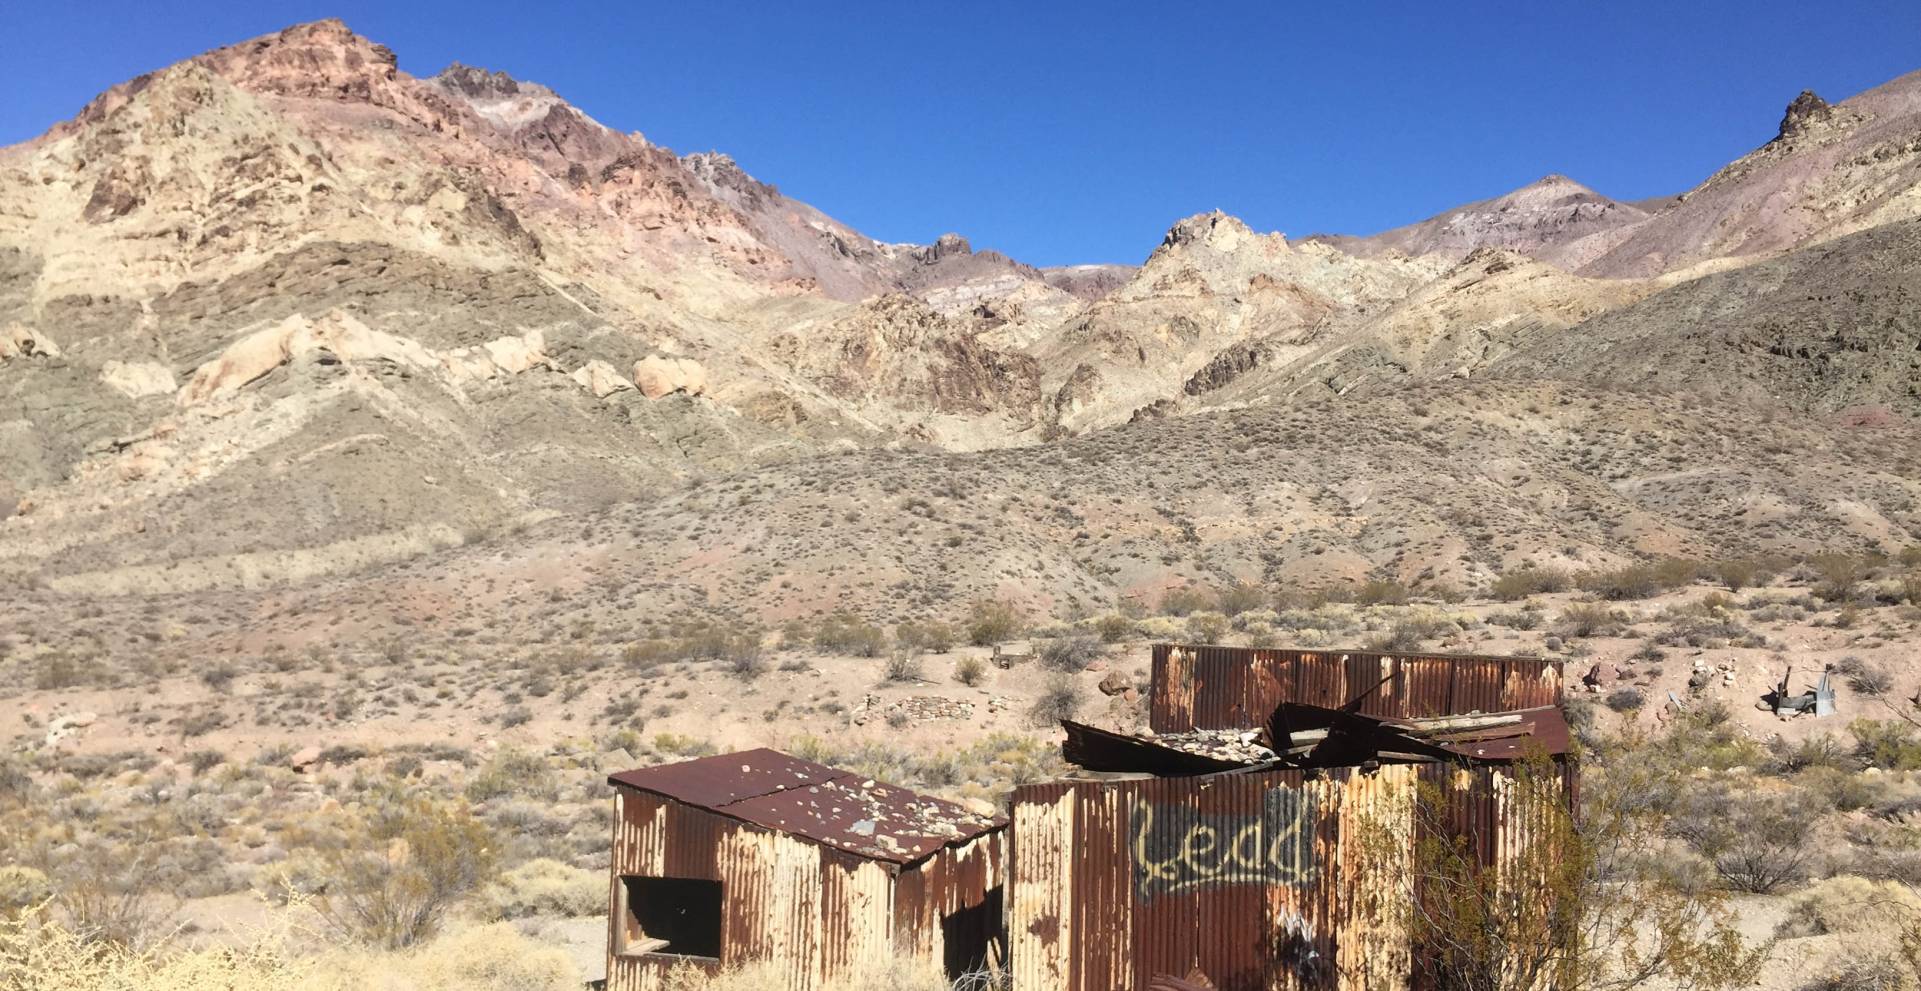 Old buildings in the ghost town of Leadfield, Death Valley National Park, California